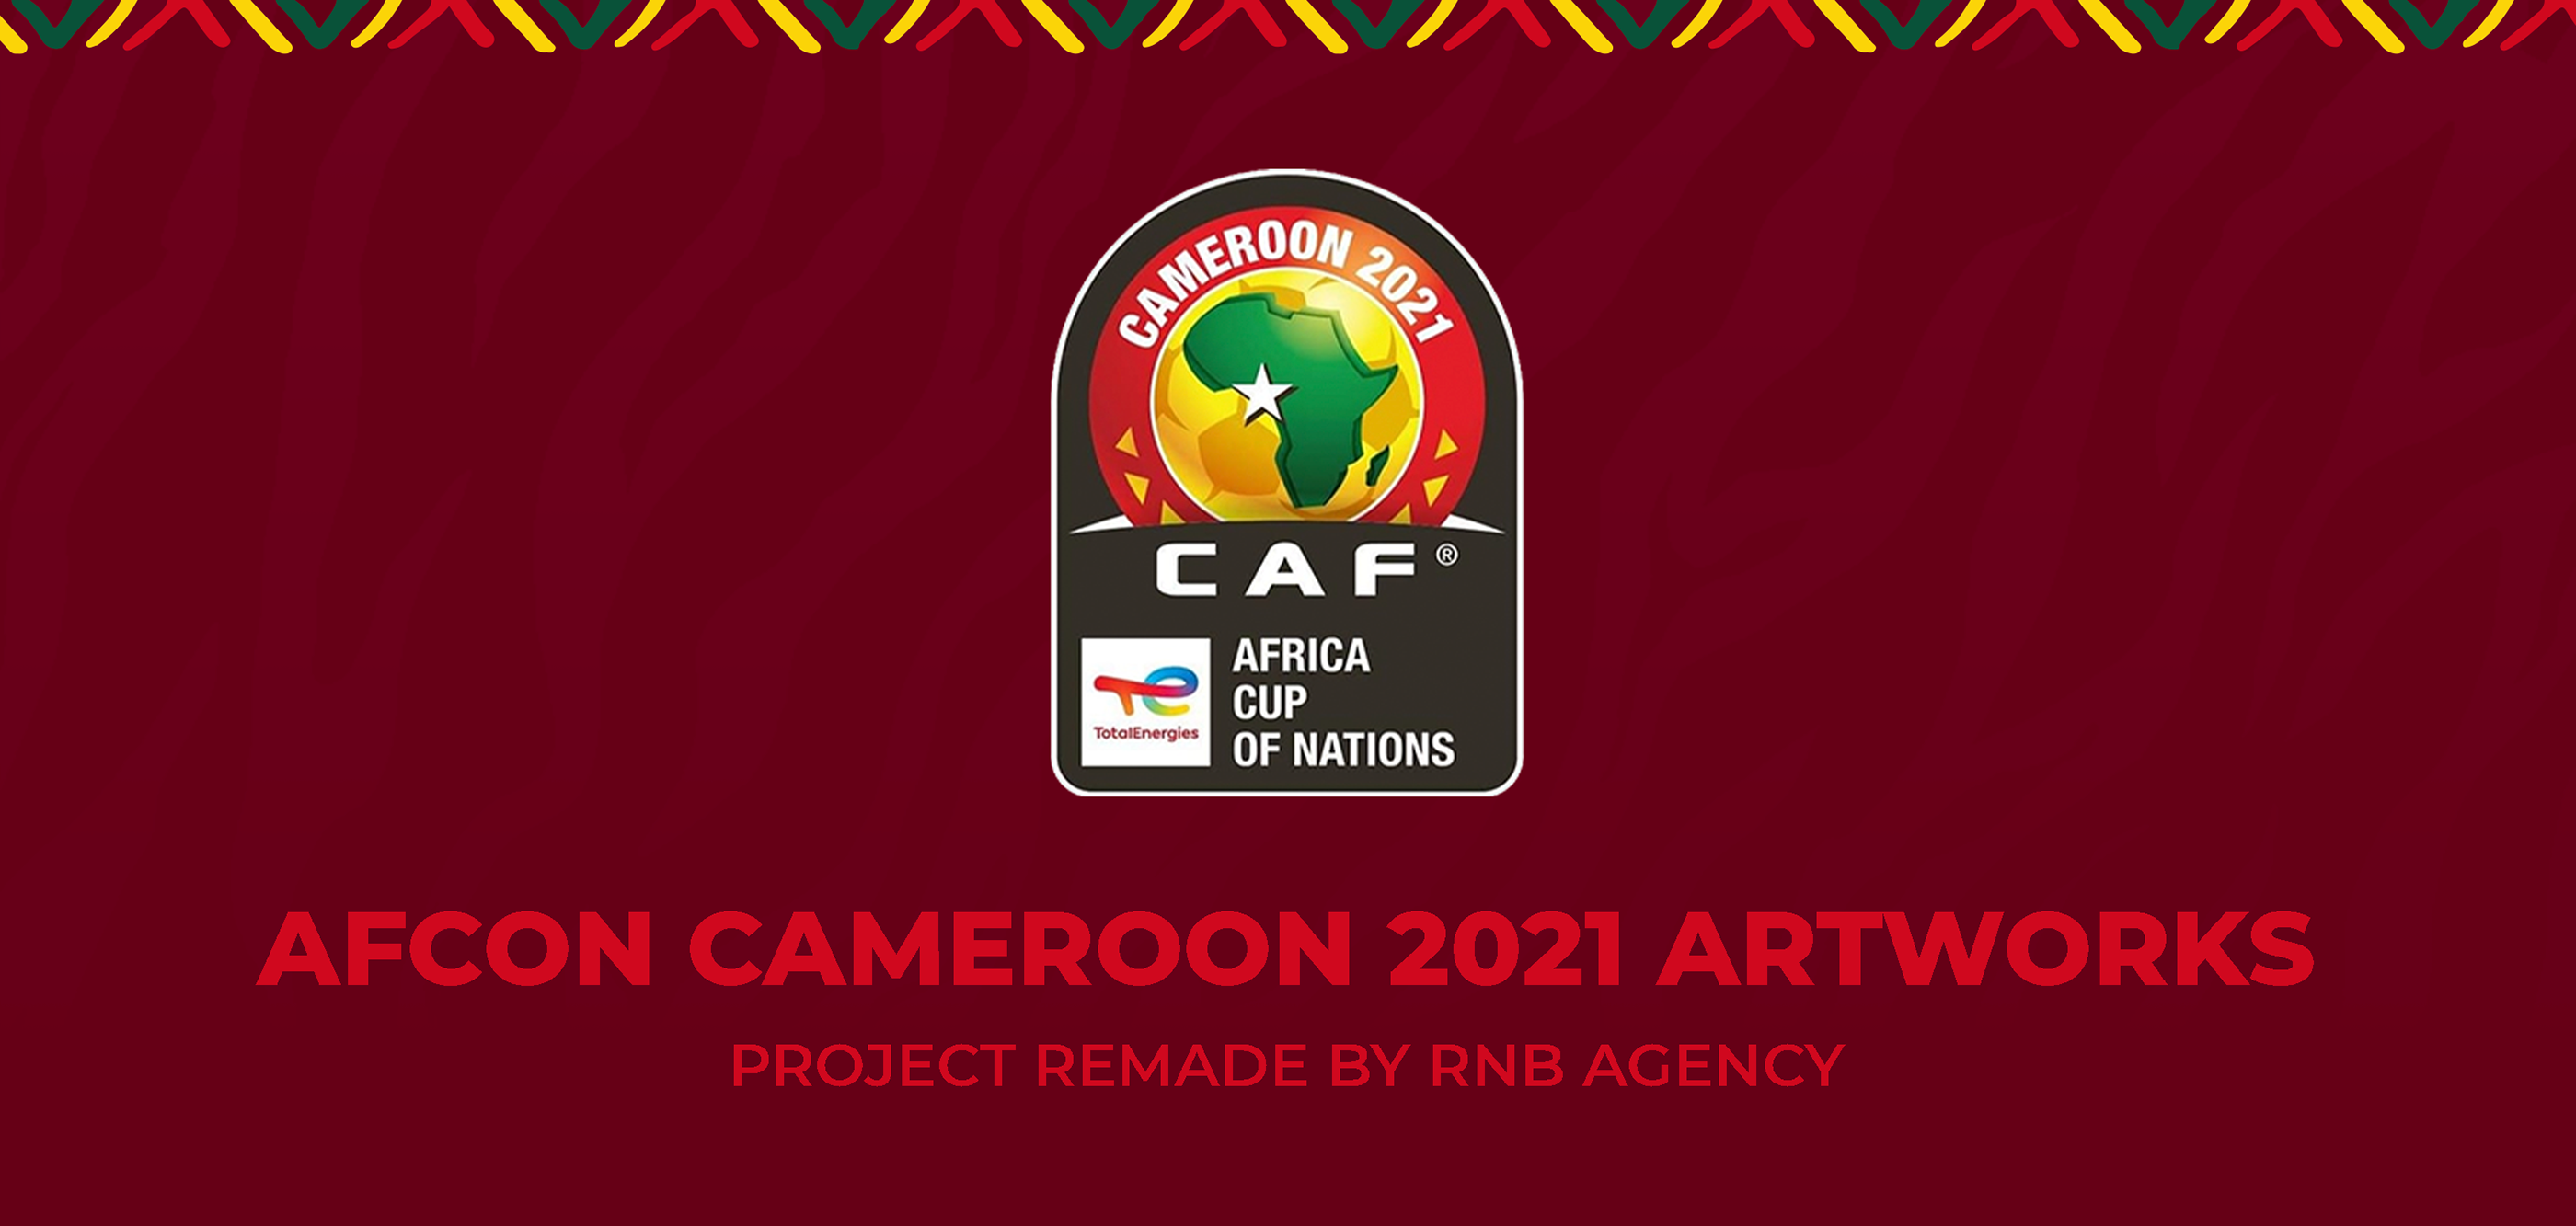 Africa cameroon in nations caf cup of 2021 CAF president